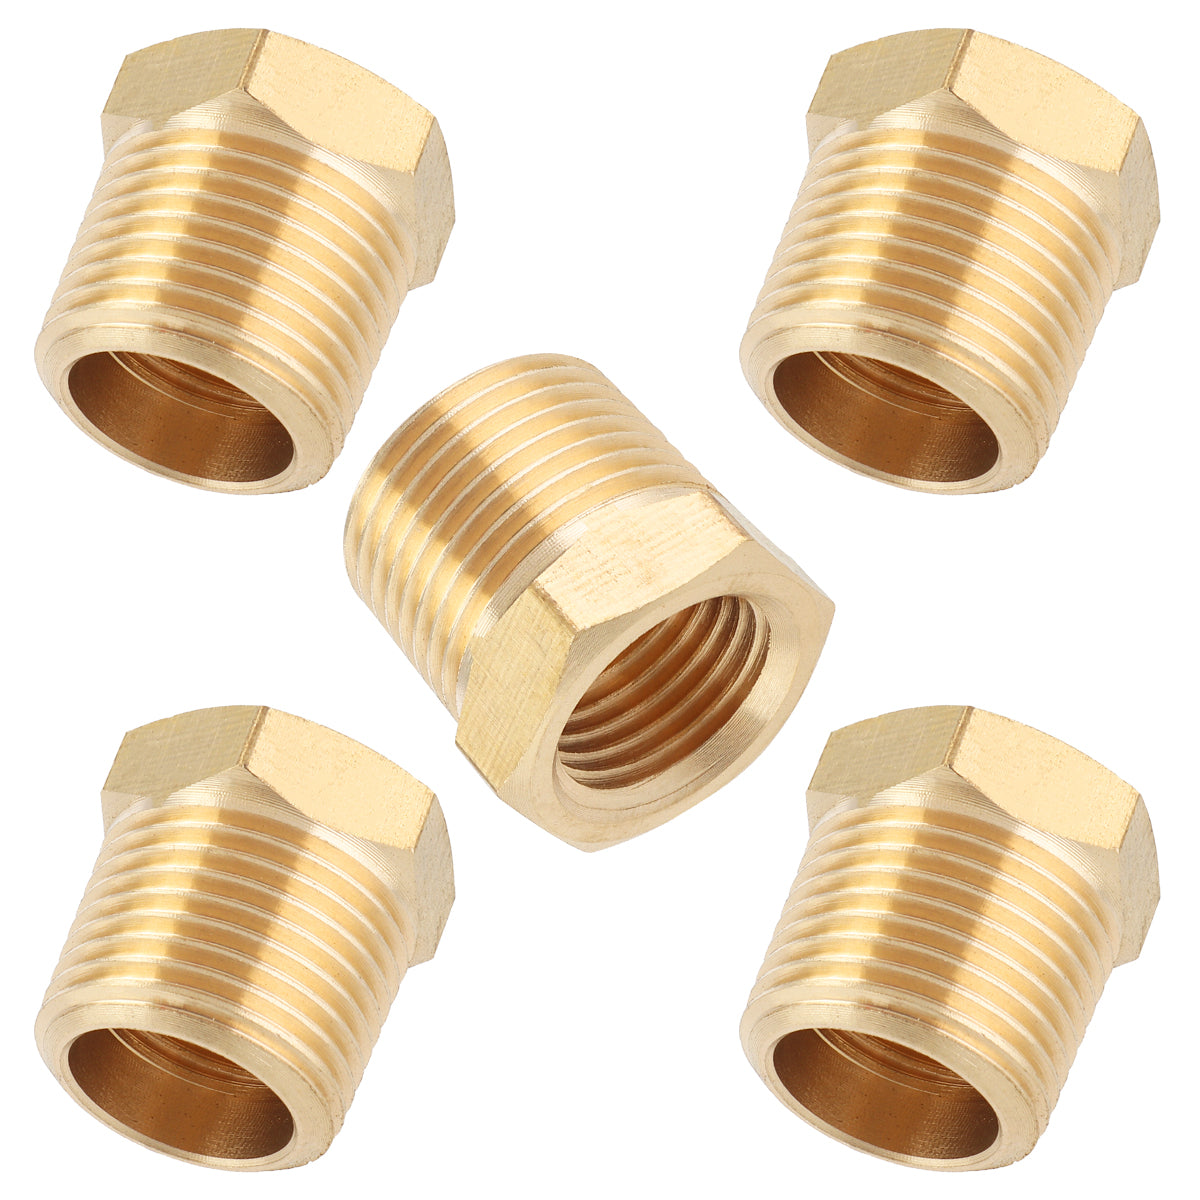 LTWFITTING Brass Pipe Hex Bushing Reducer Fittings 3/8-Inch Male BSPT x 1/4-Inch Female BSPP (Pack of 5)